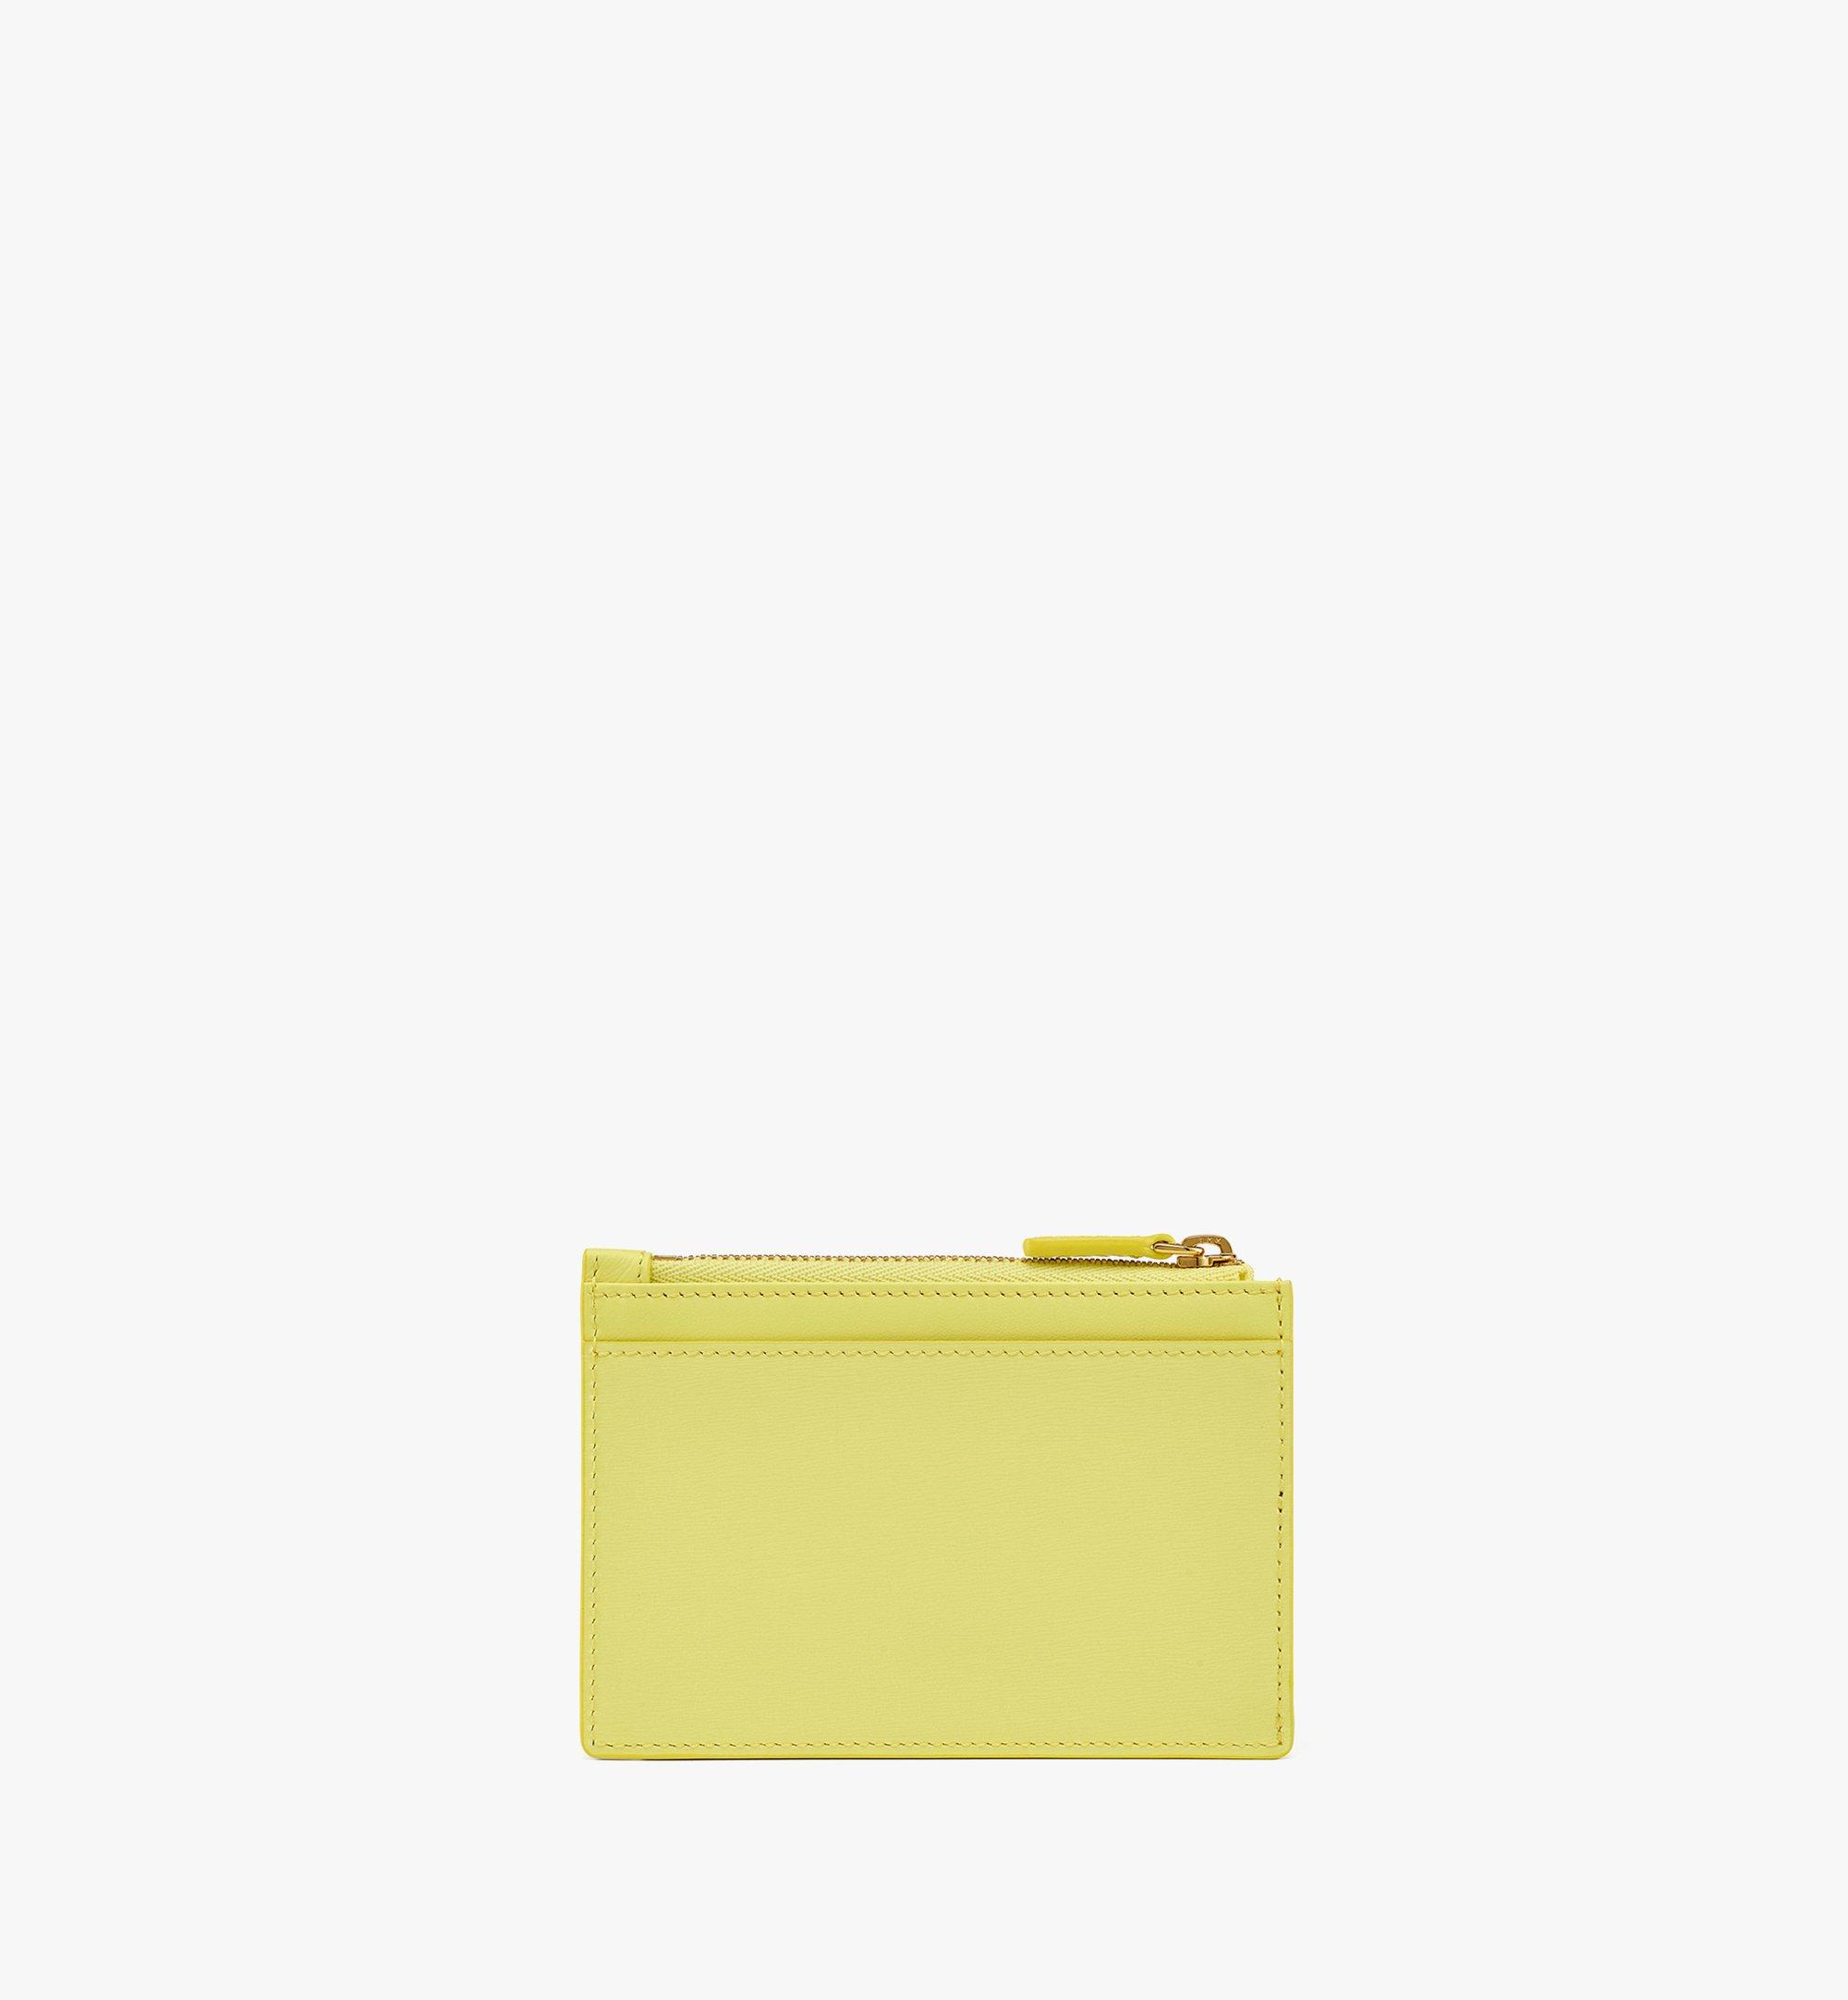 MCM Tracy Card Case in Spanish Leather Yellow MYACSPA02Y4001 Alternate View 2